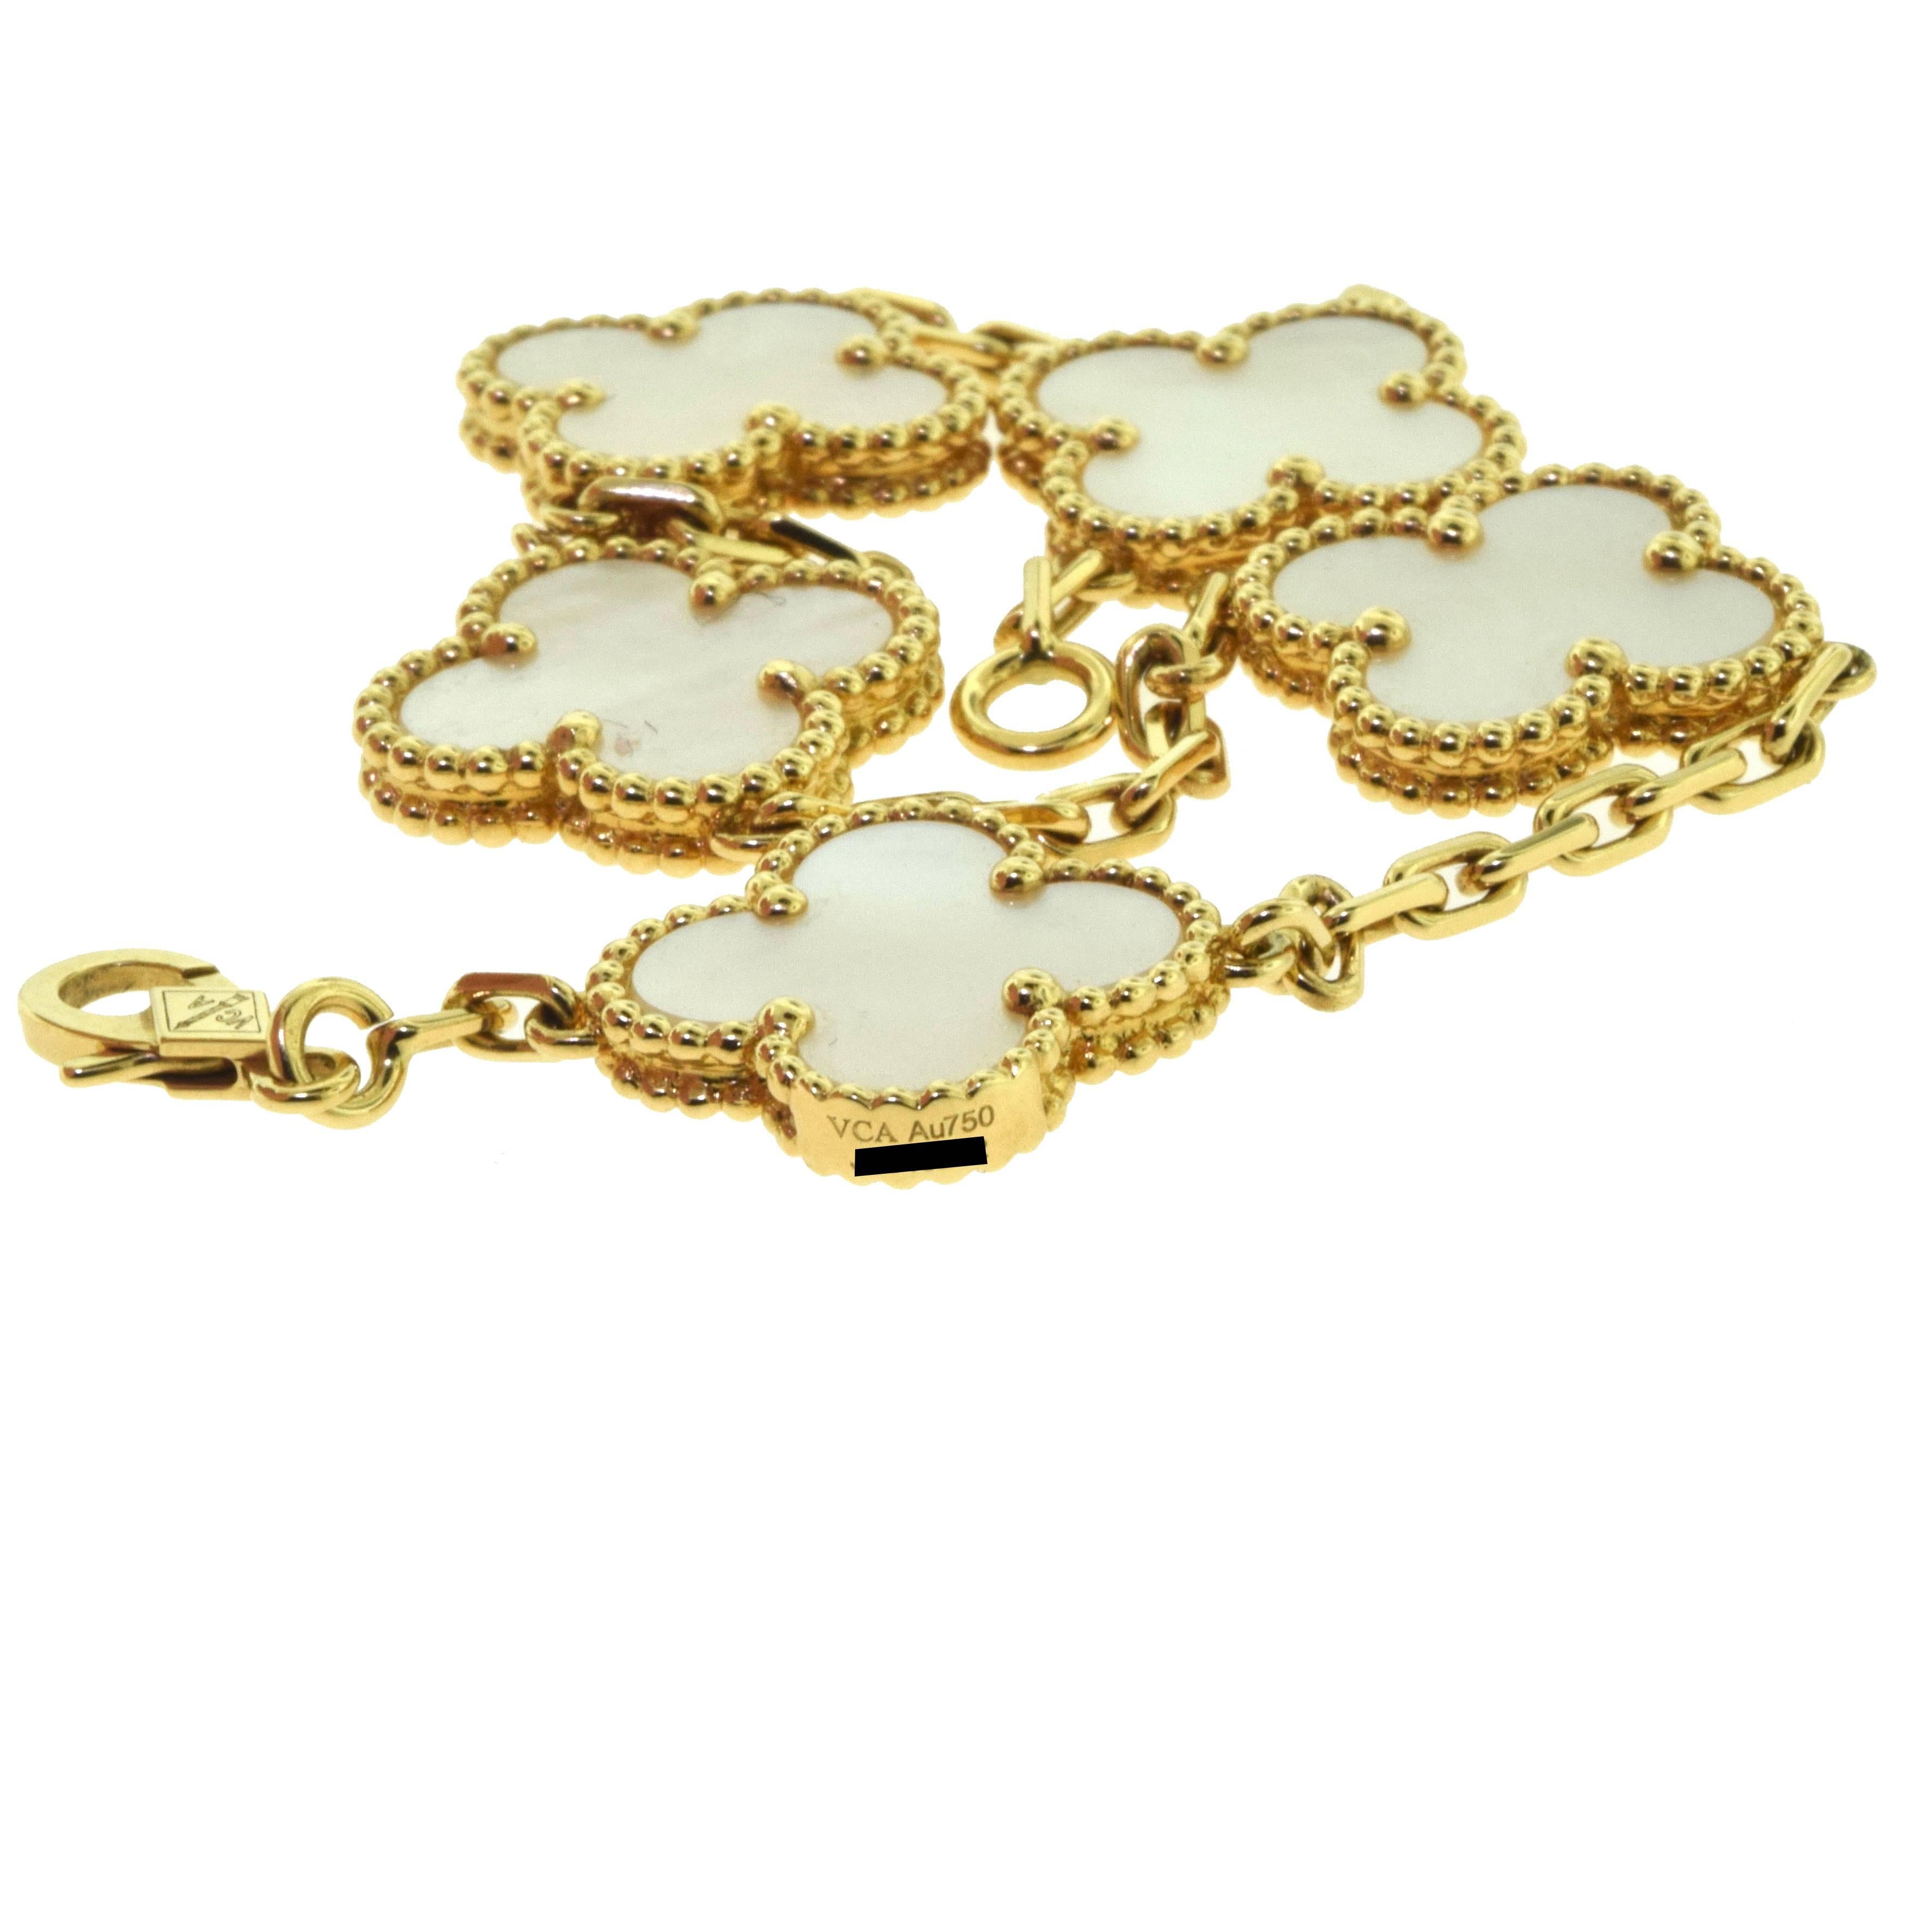 Van Cleef & Arpels Mother-of-Pearl Magic Alhambra Bracelet 18 Karat Yellow Gold In Excellent Condition For Sale In Miami, FL